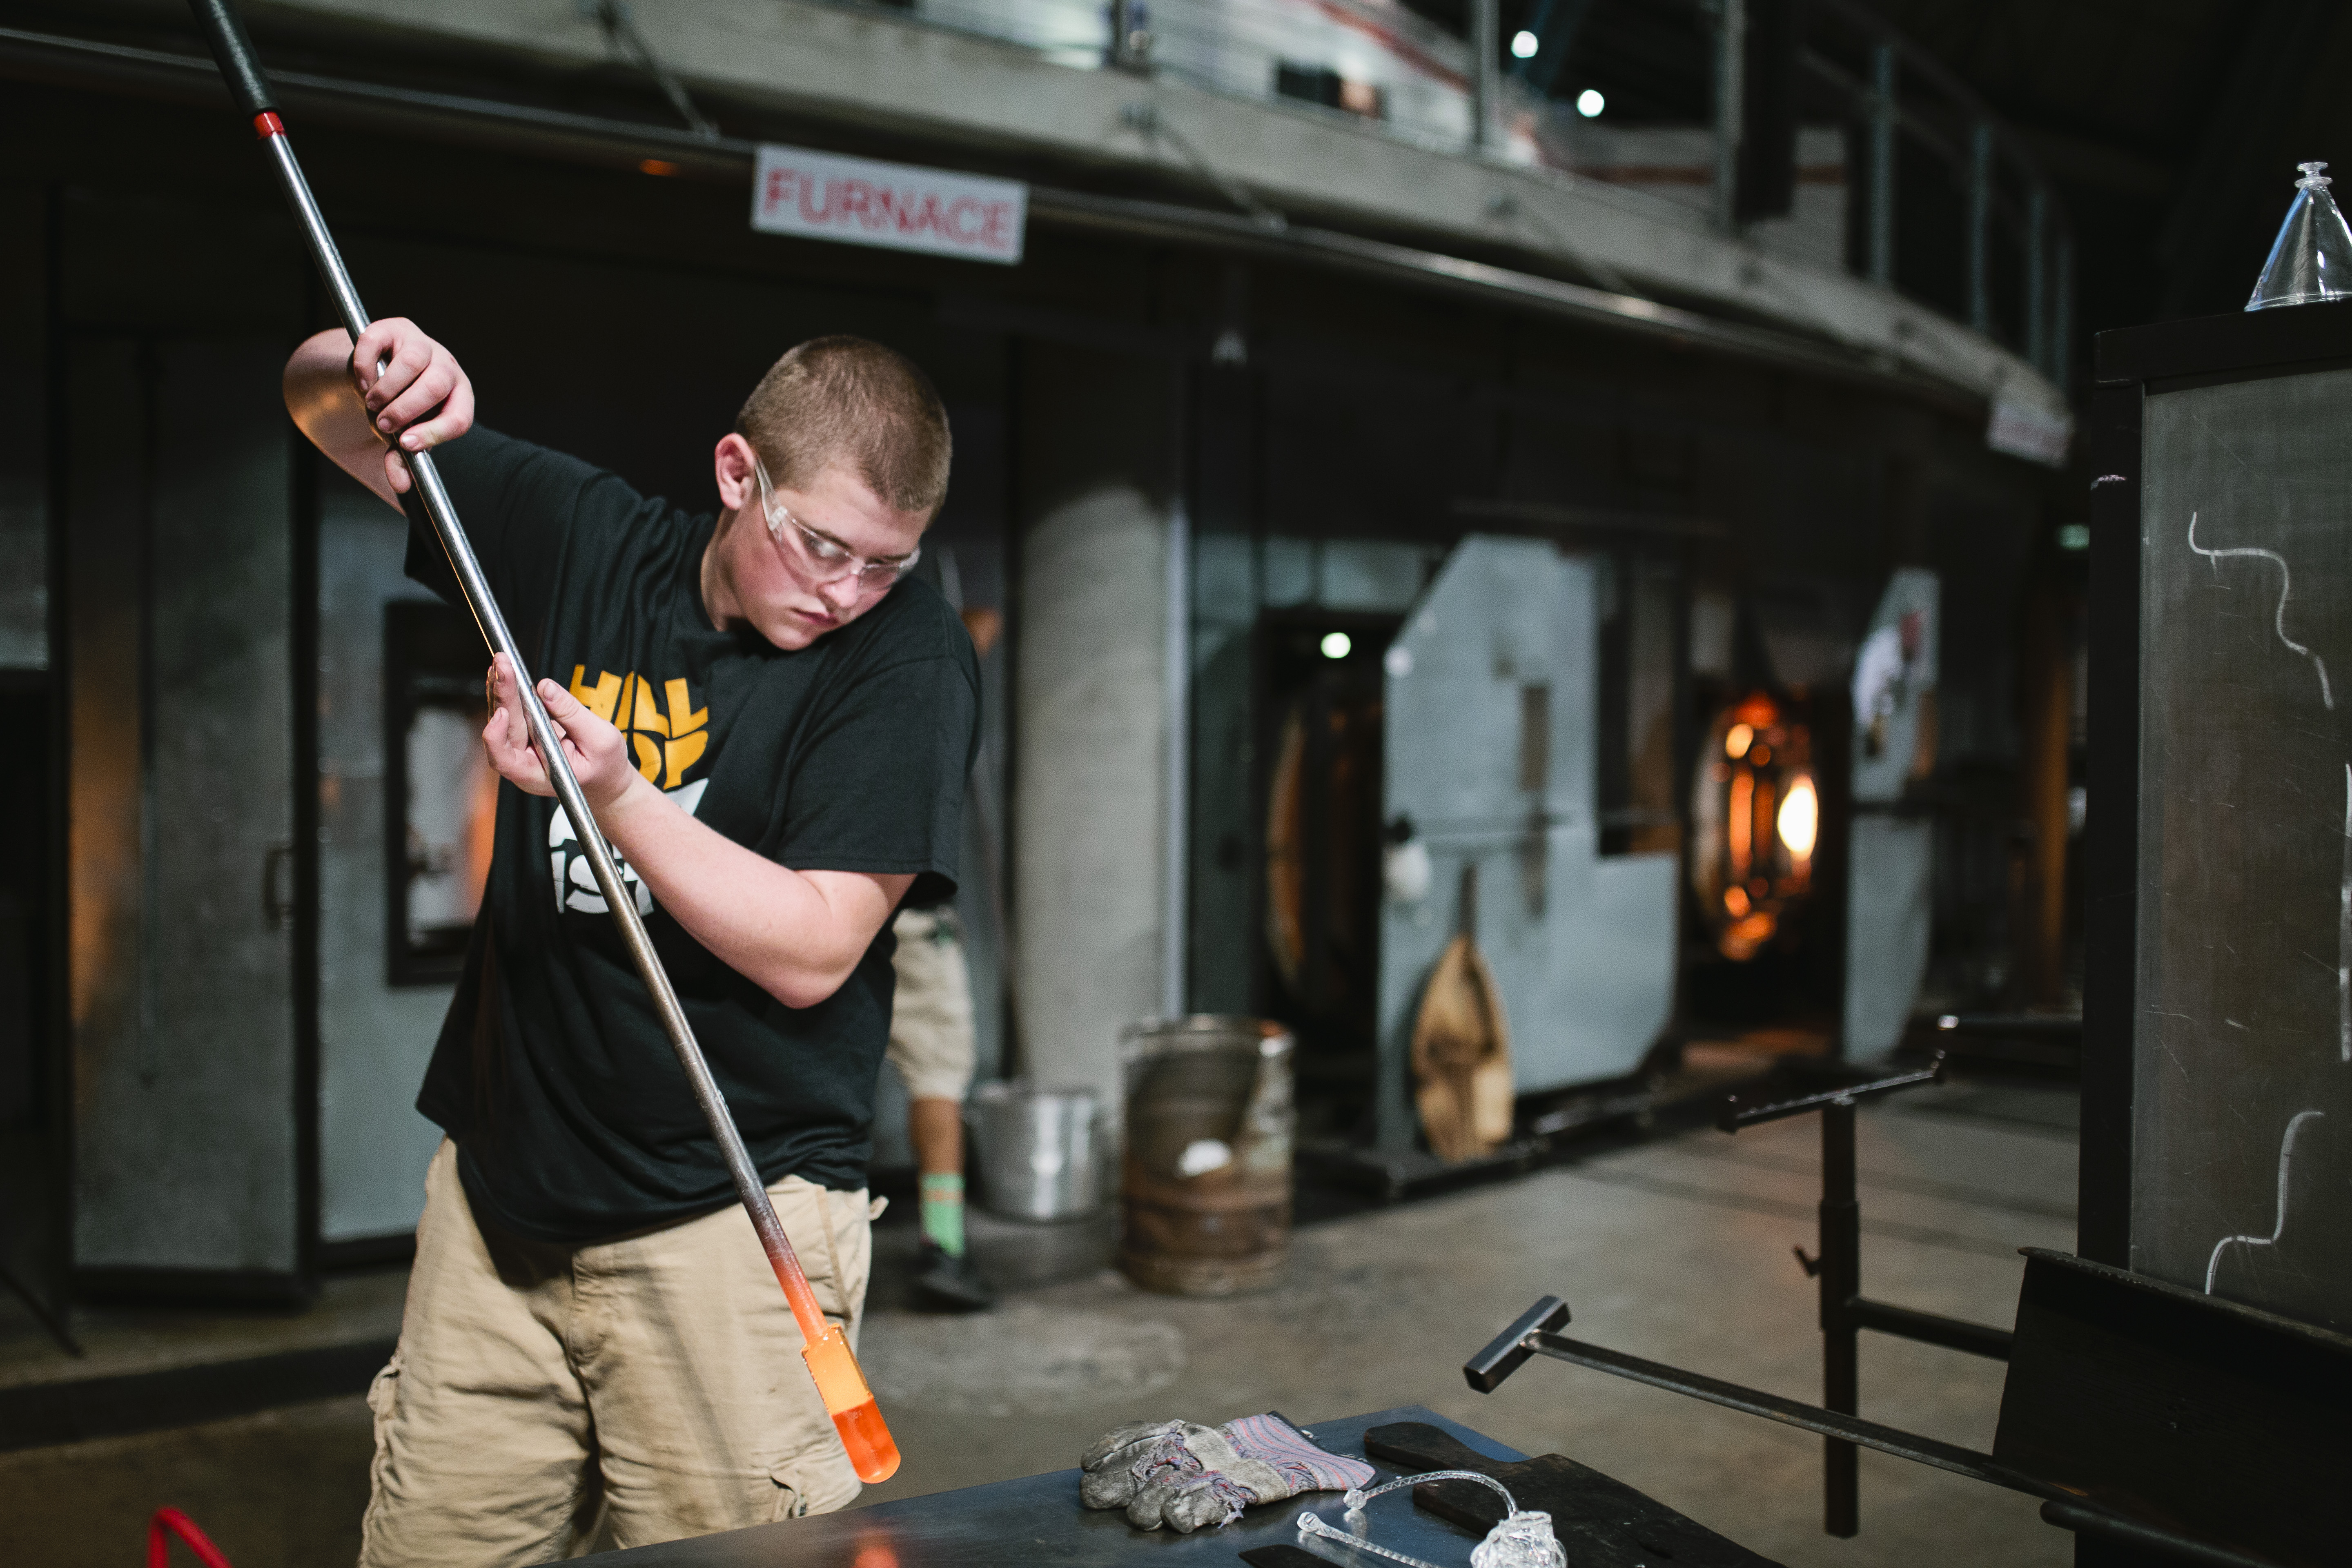 Third Thursday at Museum of Glass